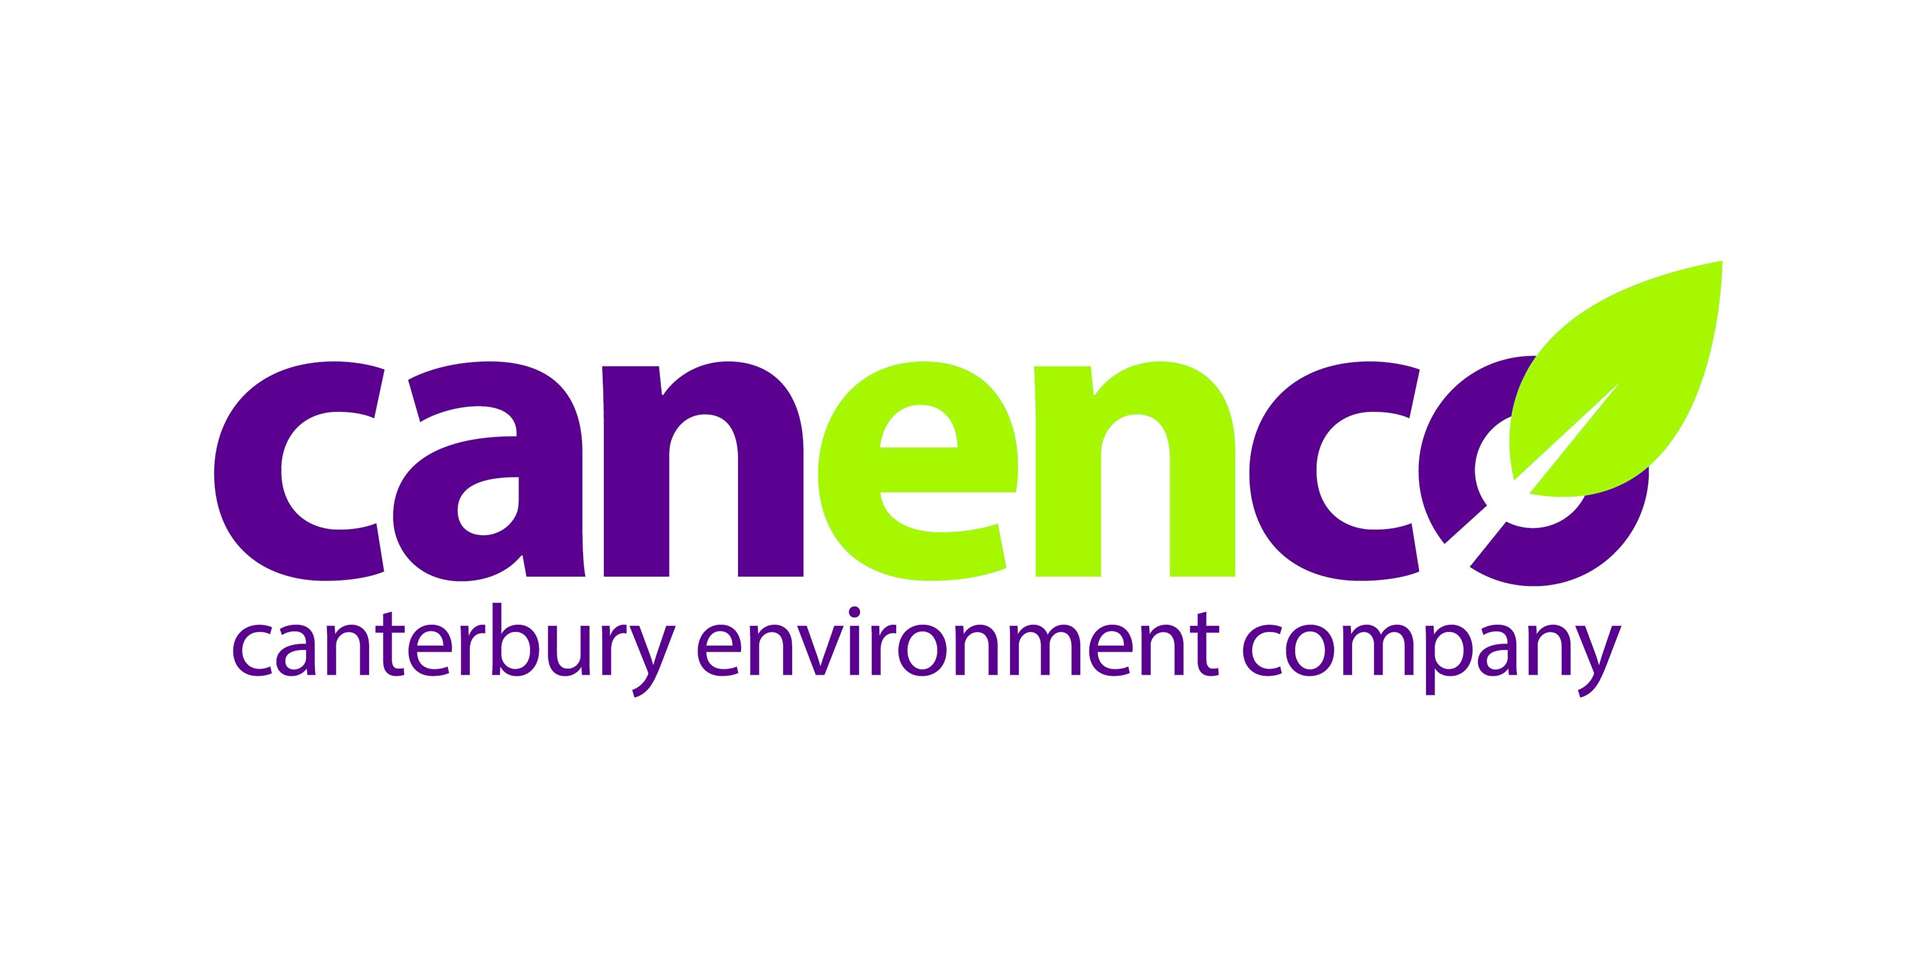 Canenco took over from Serco earlier this year